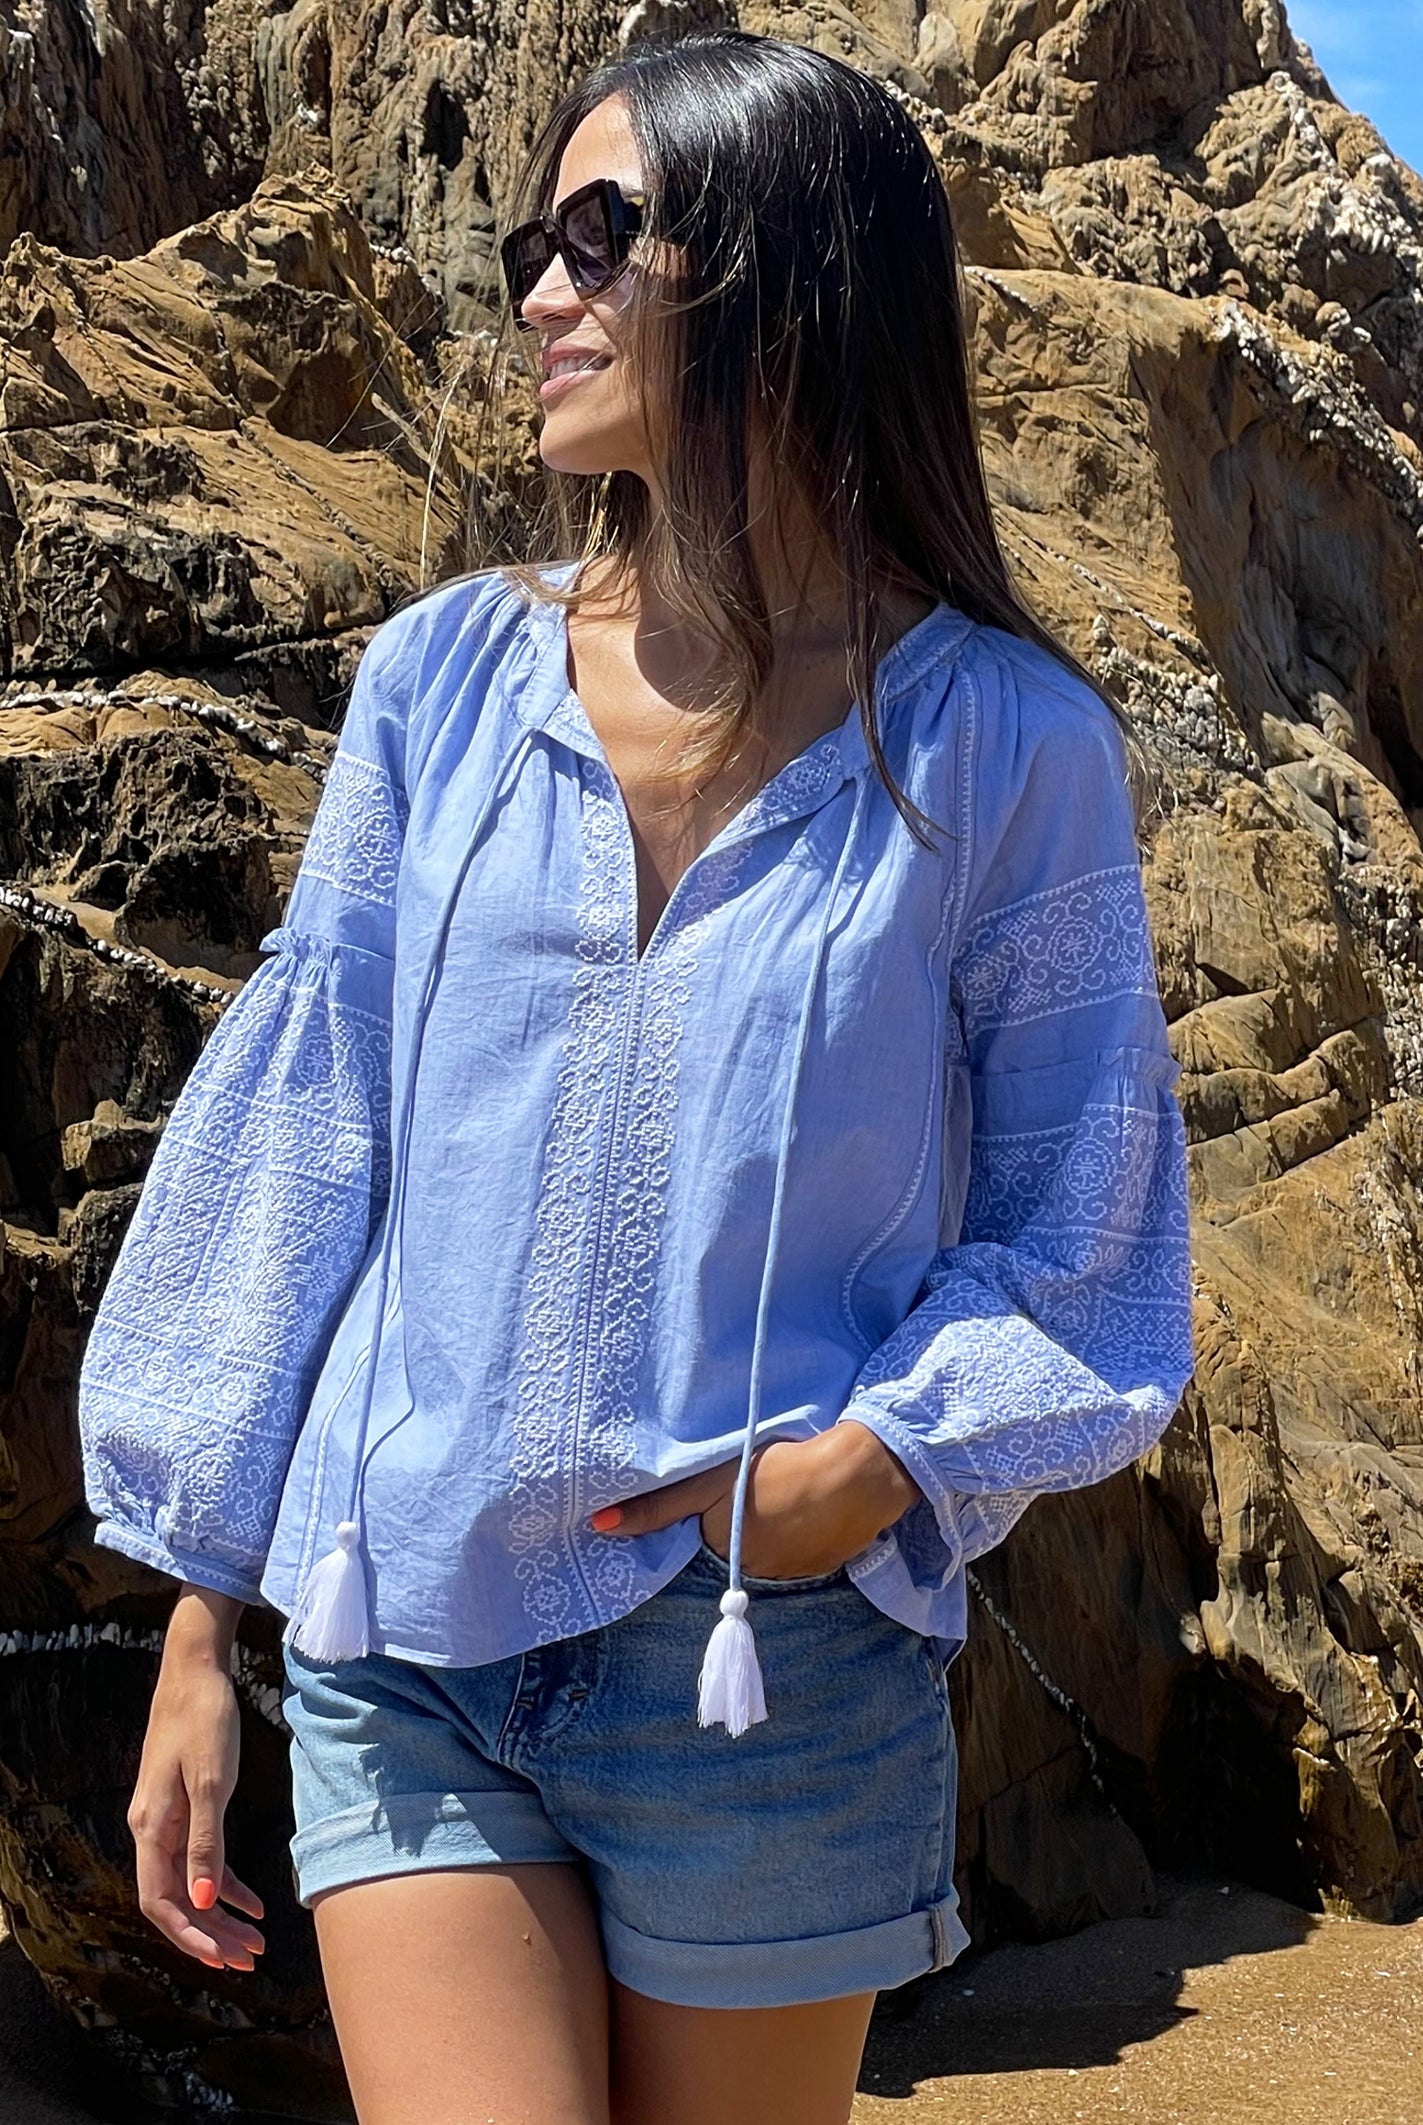 A model stood in front of a rock wearing a Rose and Rose blue cotton Capri top, denim shorts and sunglasses.  